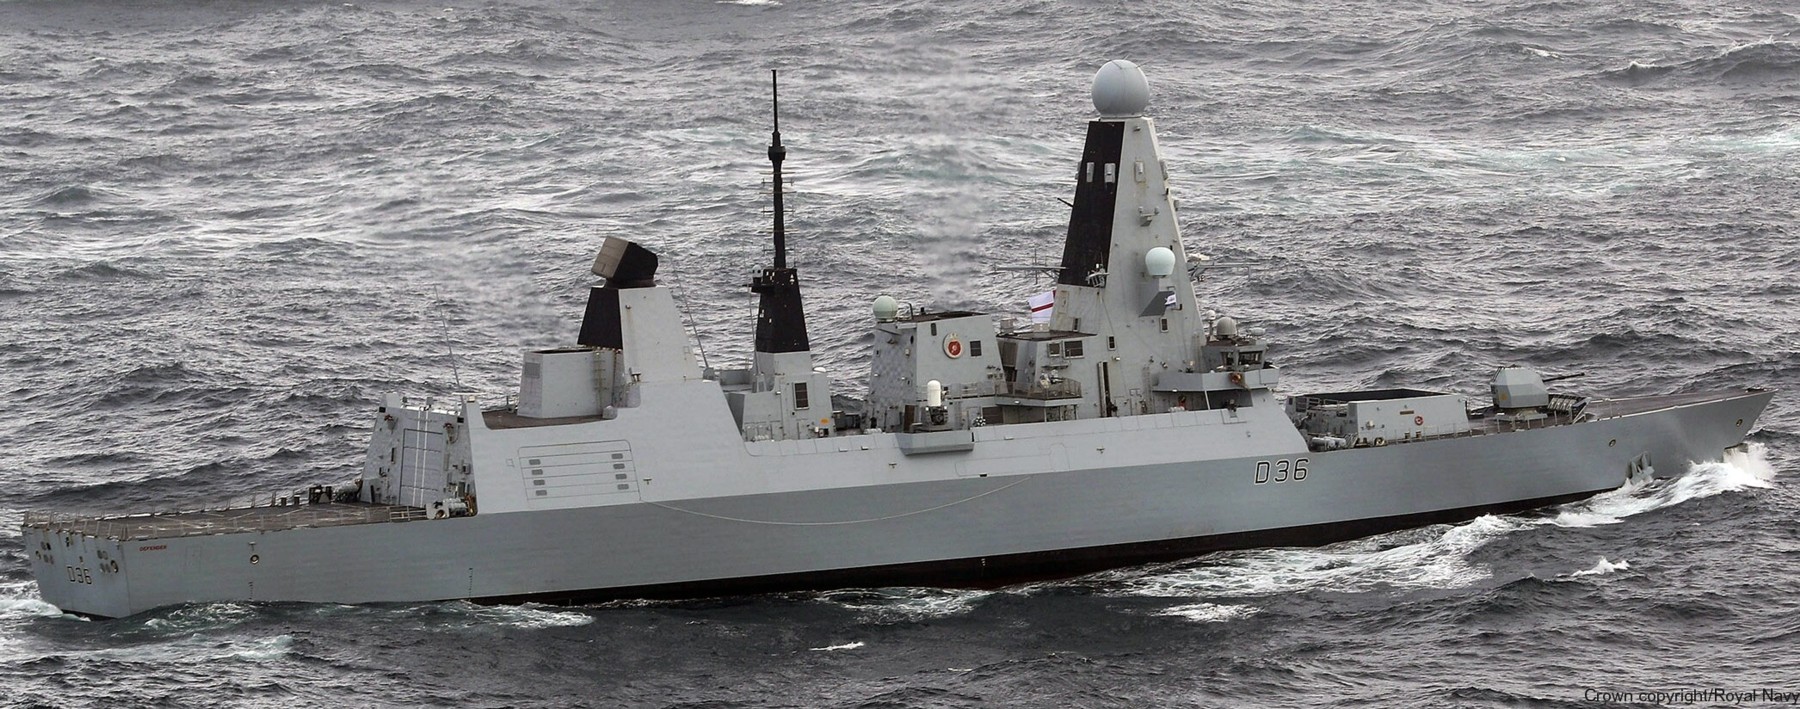 hms defender d-36 type 45 daring class guided missile destroyer ddg royal navy sea viper paams 23